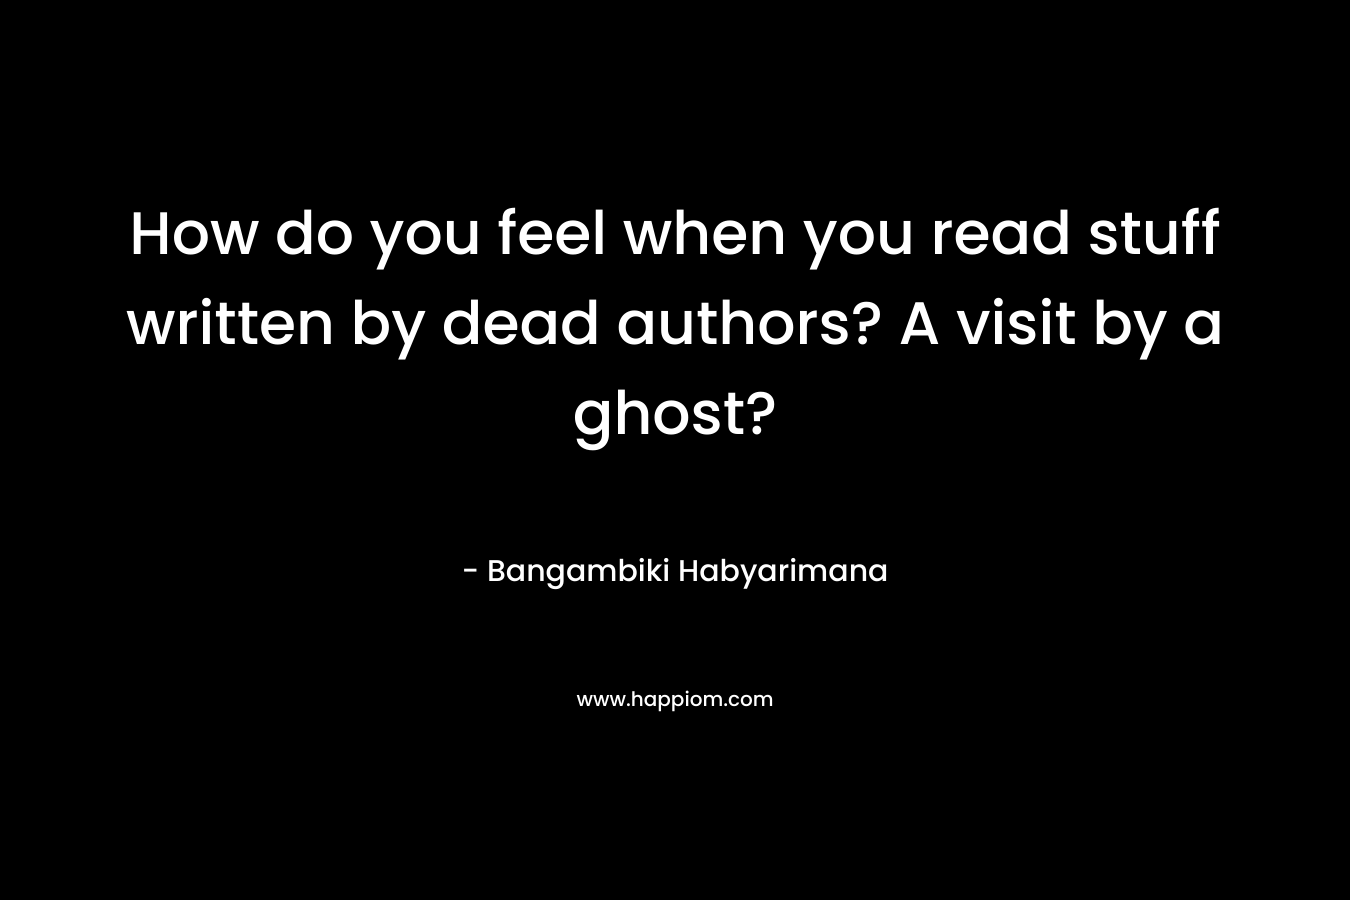 How do you feel when you read stuff written by dead authors? A visit by a ghost?